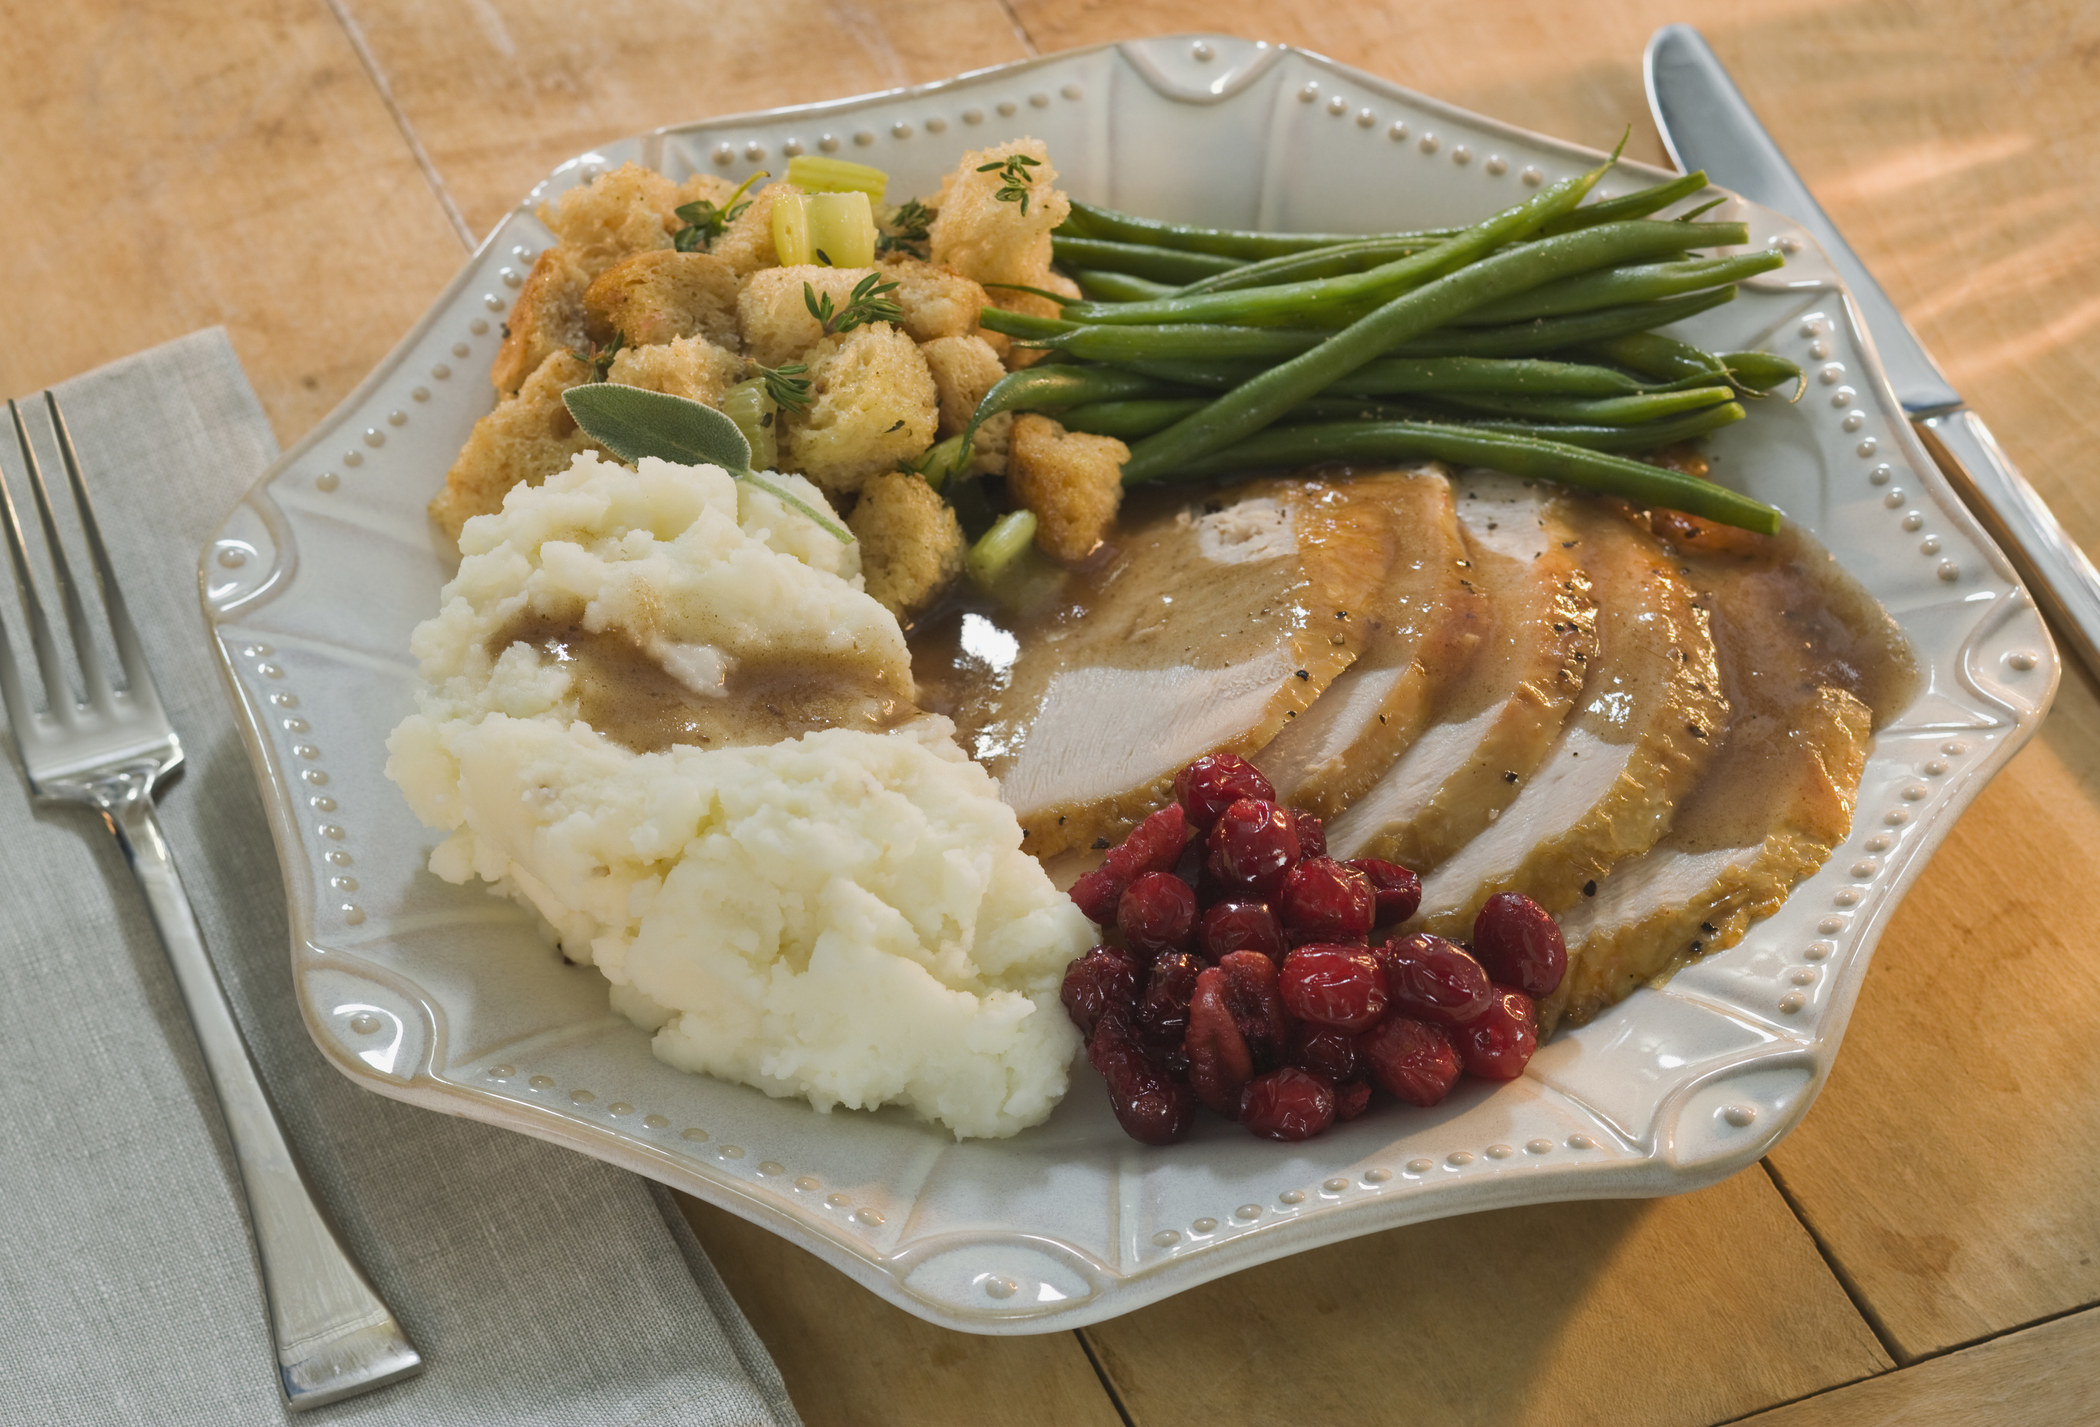 Plate of sliced turkey and mashed potatoes with gravy, stuffing, cranberries, and string beans